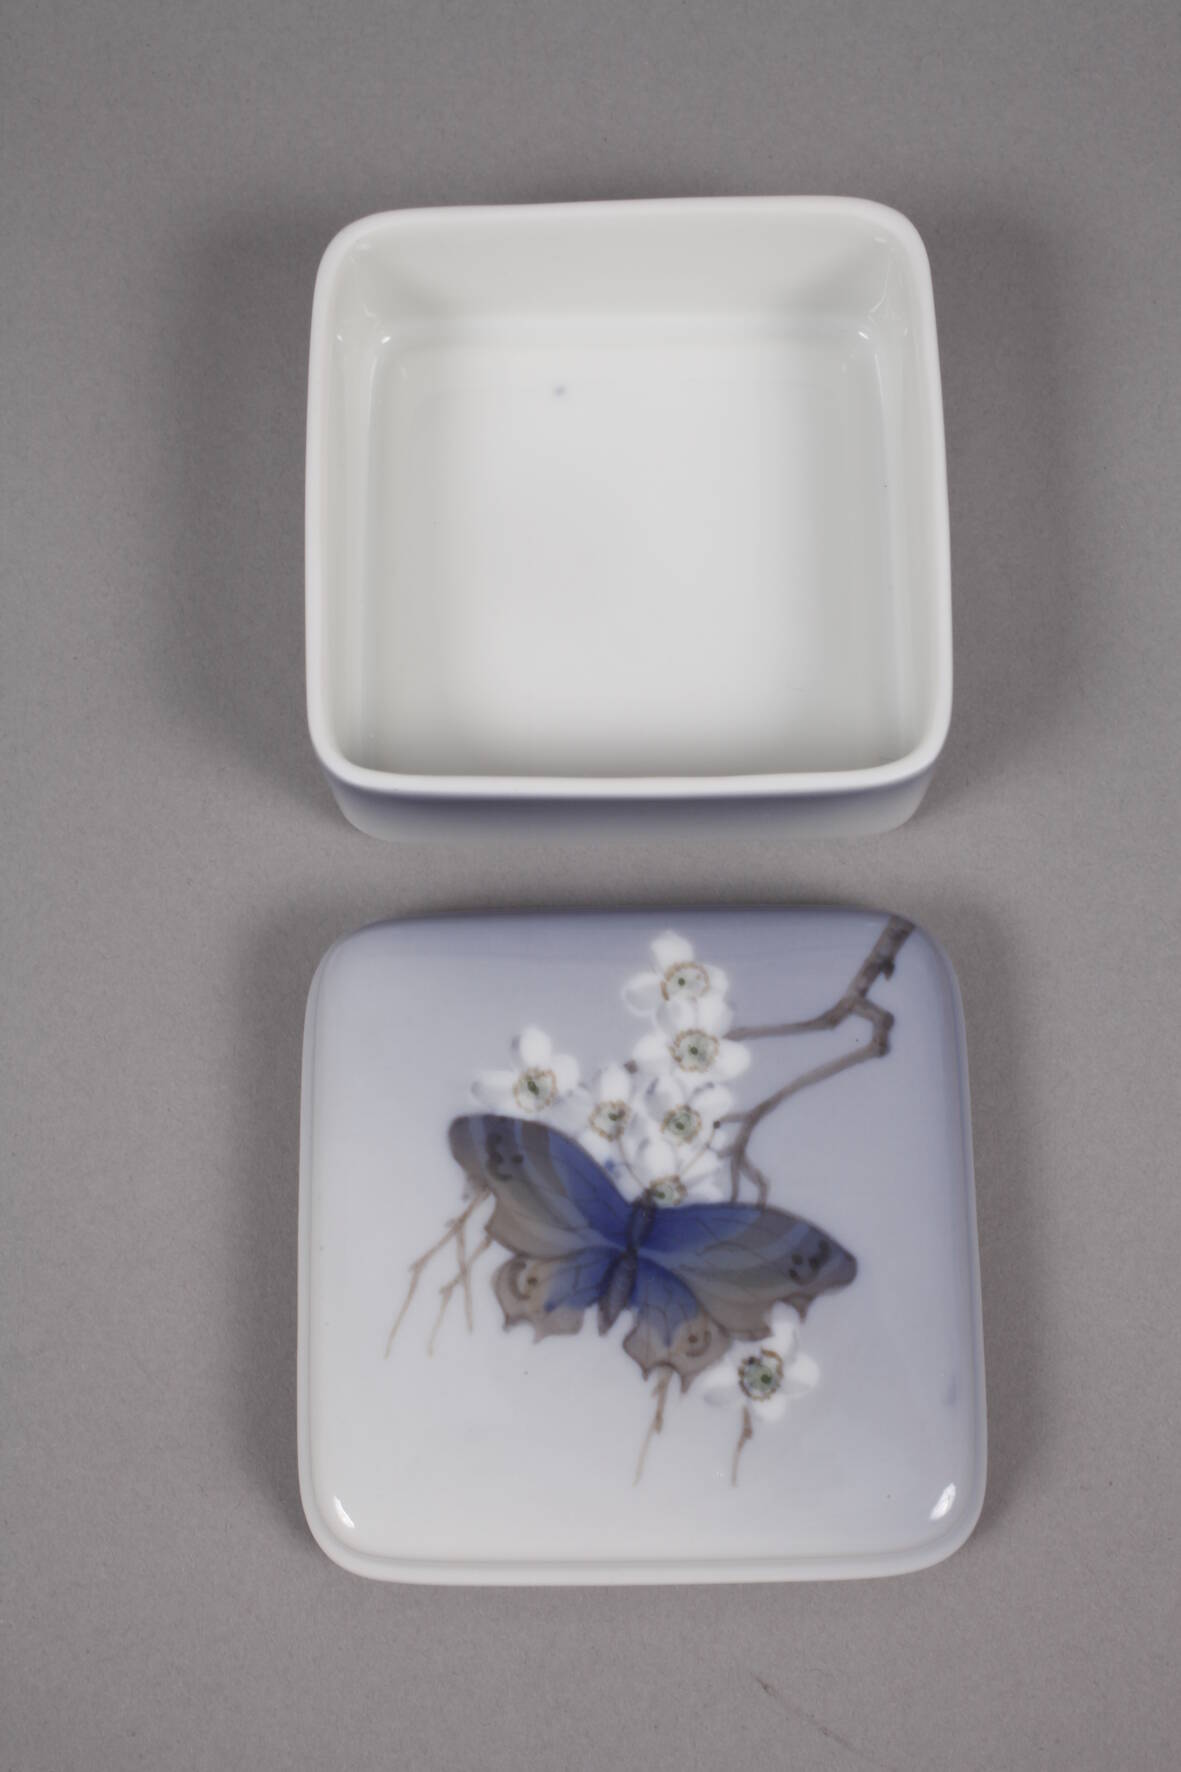 Copenhagen bowl and box butterfly decor - Image 2 of 5